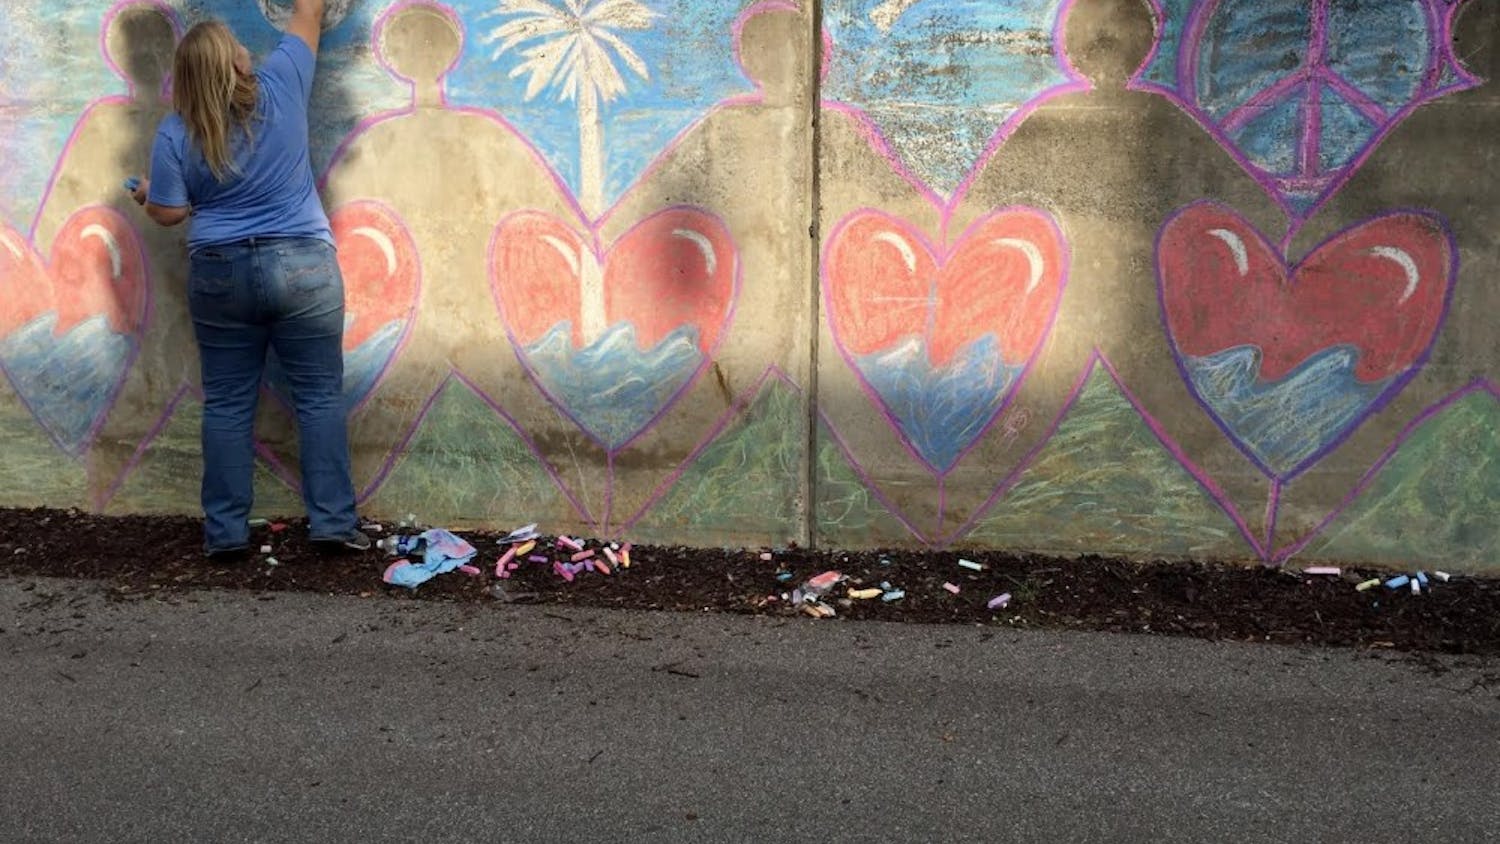 An artist spreads love and hope through her artwork on the walls of the Lincoln Street tunnel.